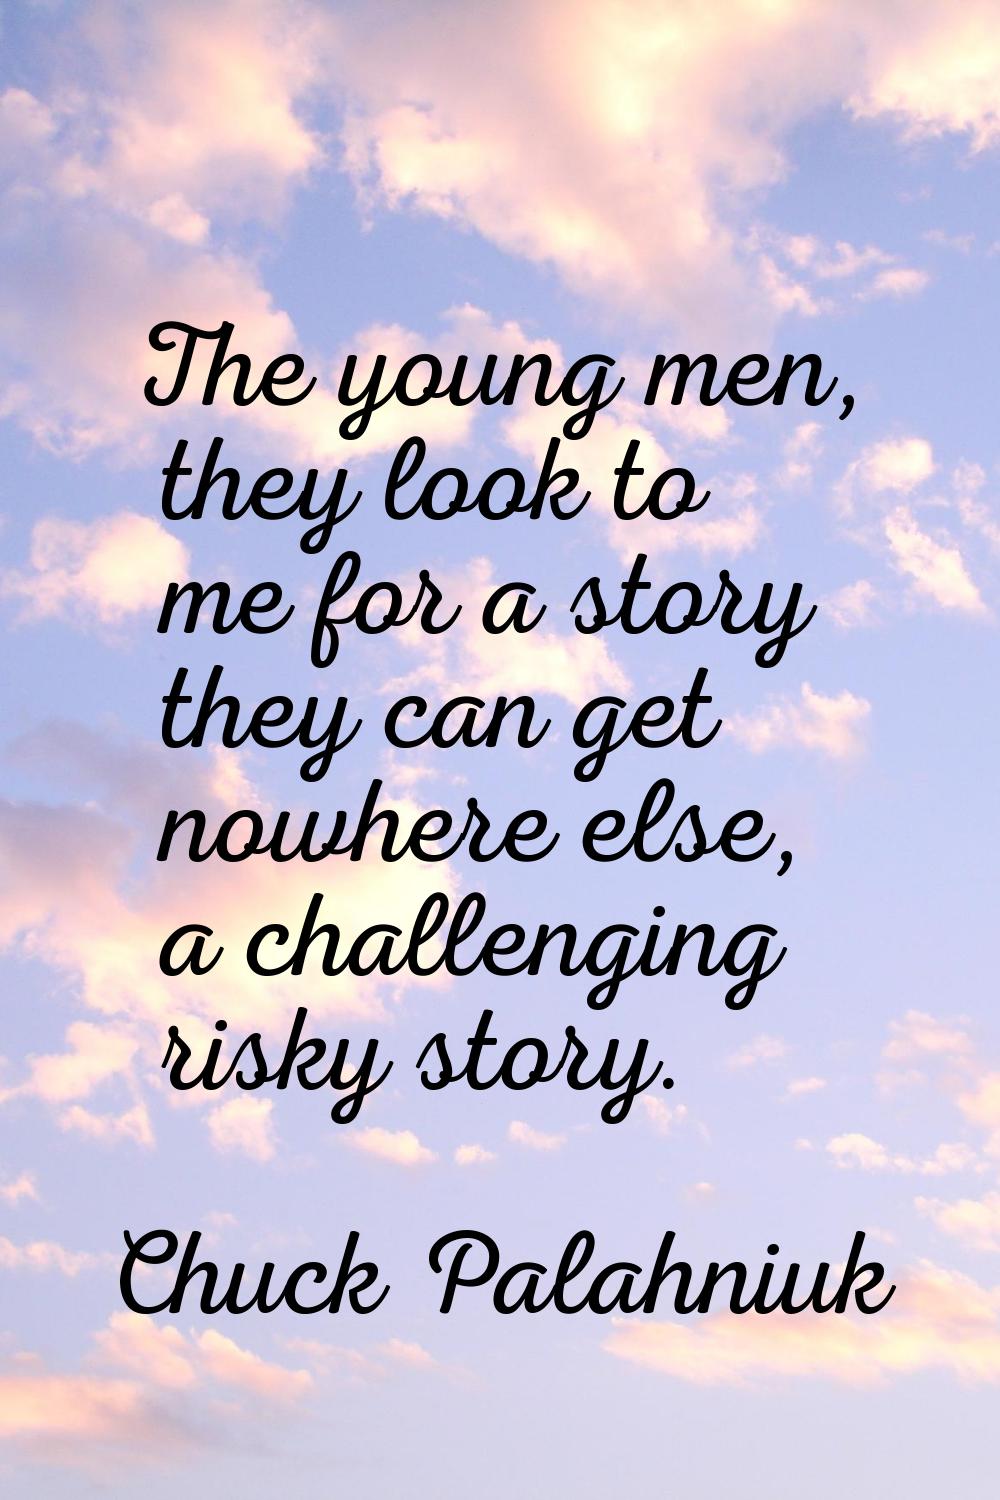 The young men, they look to me for a story they can get nowhere else, a challenging risky story.